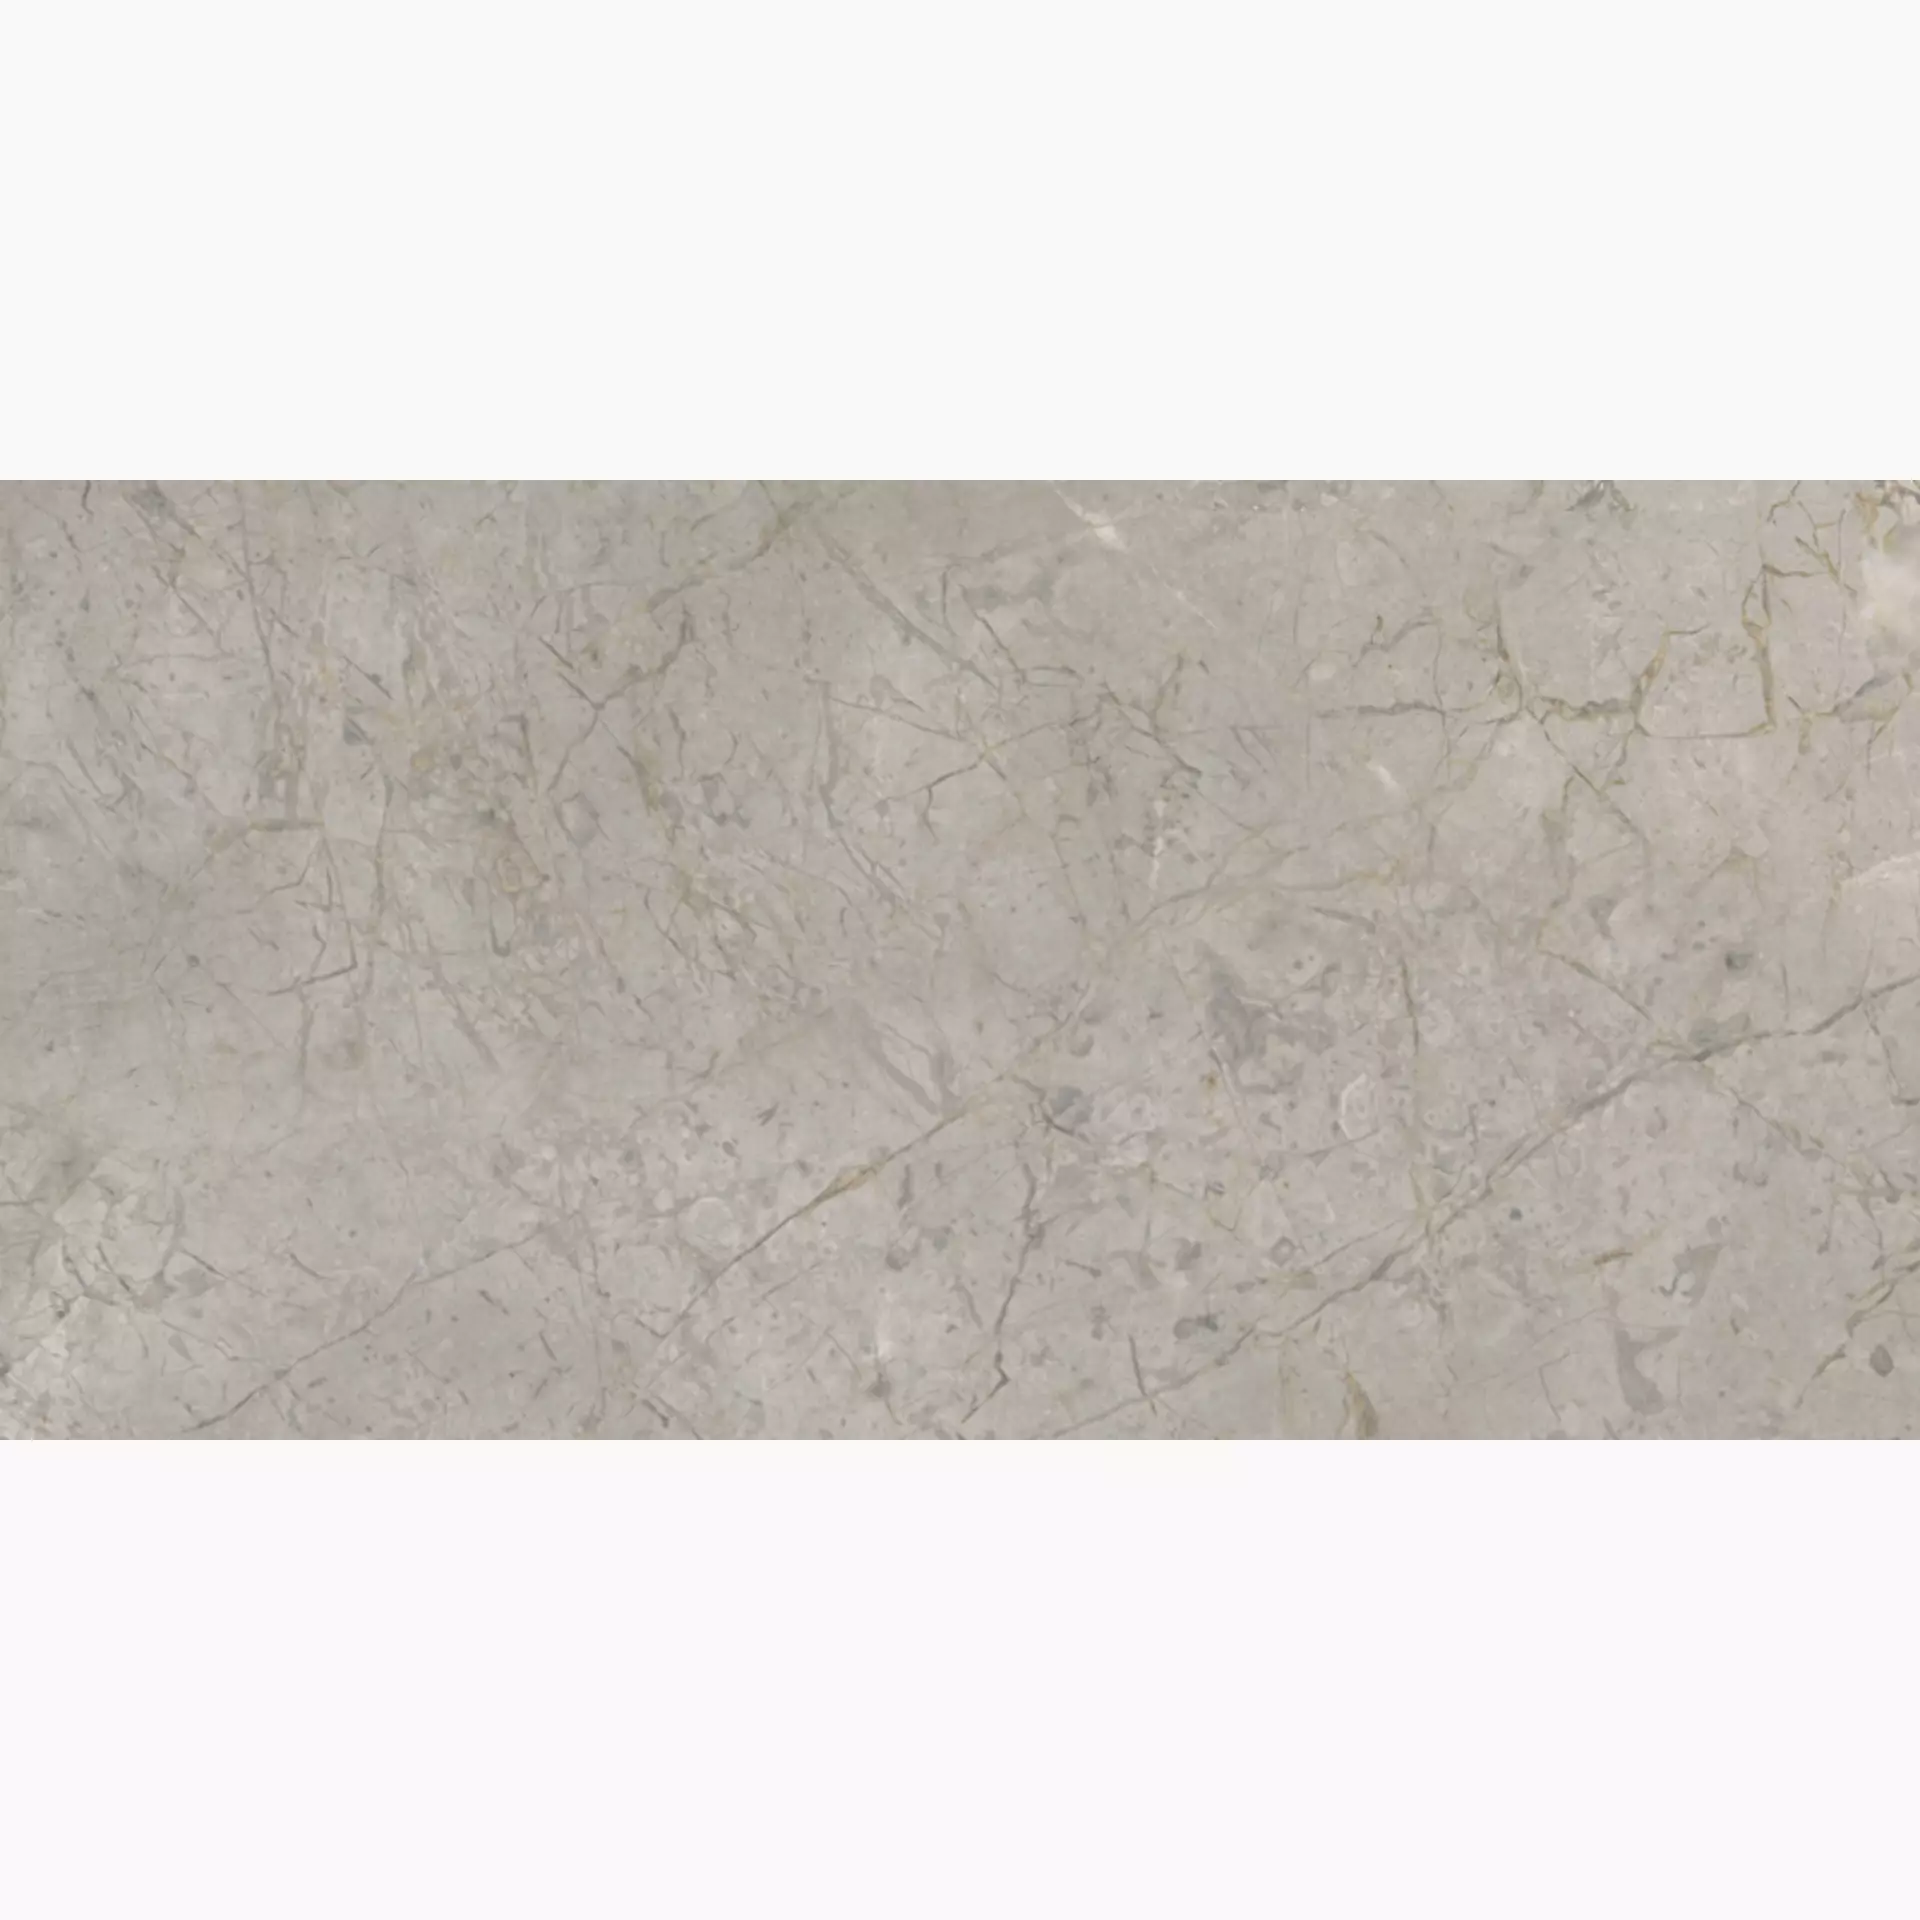 Keope Elements Lux Silver Grey Lappato 32413232 60x120cm rectified 9mm